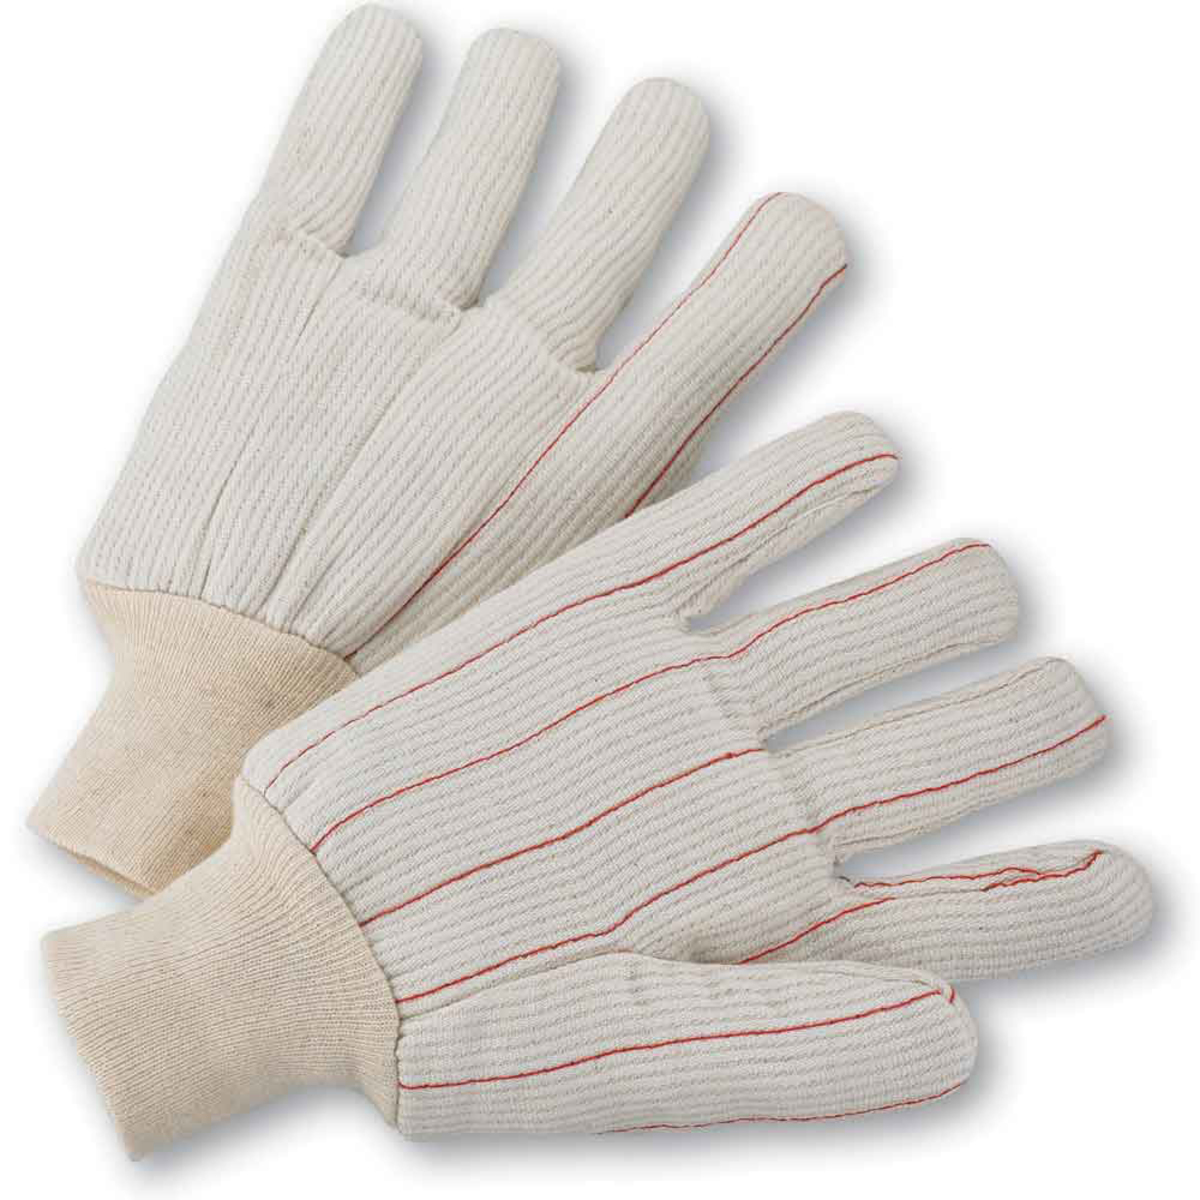 PIP® White Large Cotton And Polyester General Purpose Gloves With Knit Wrist